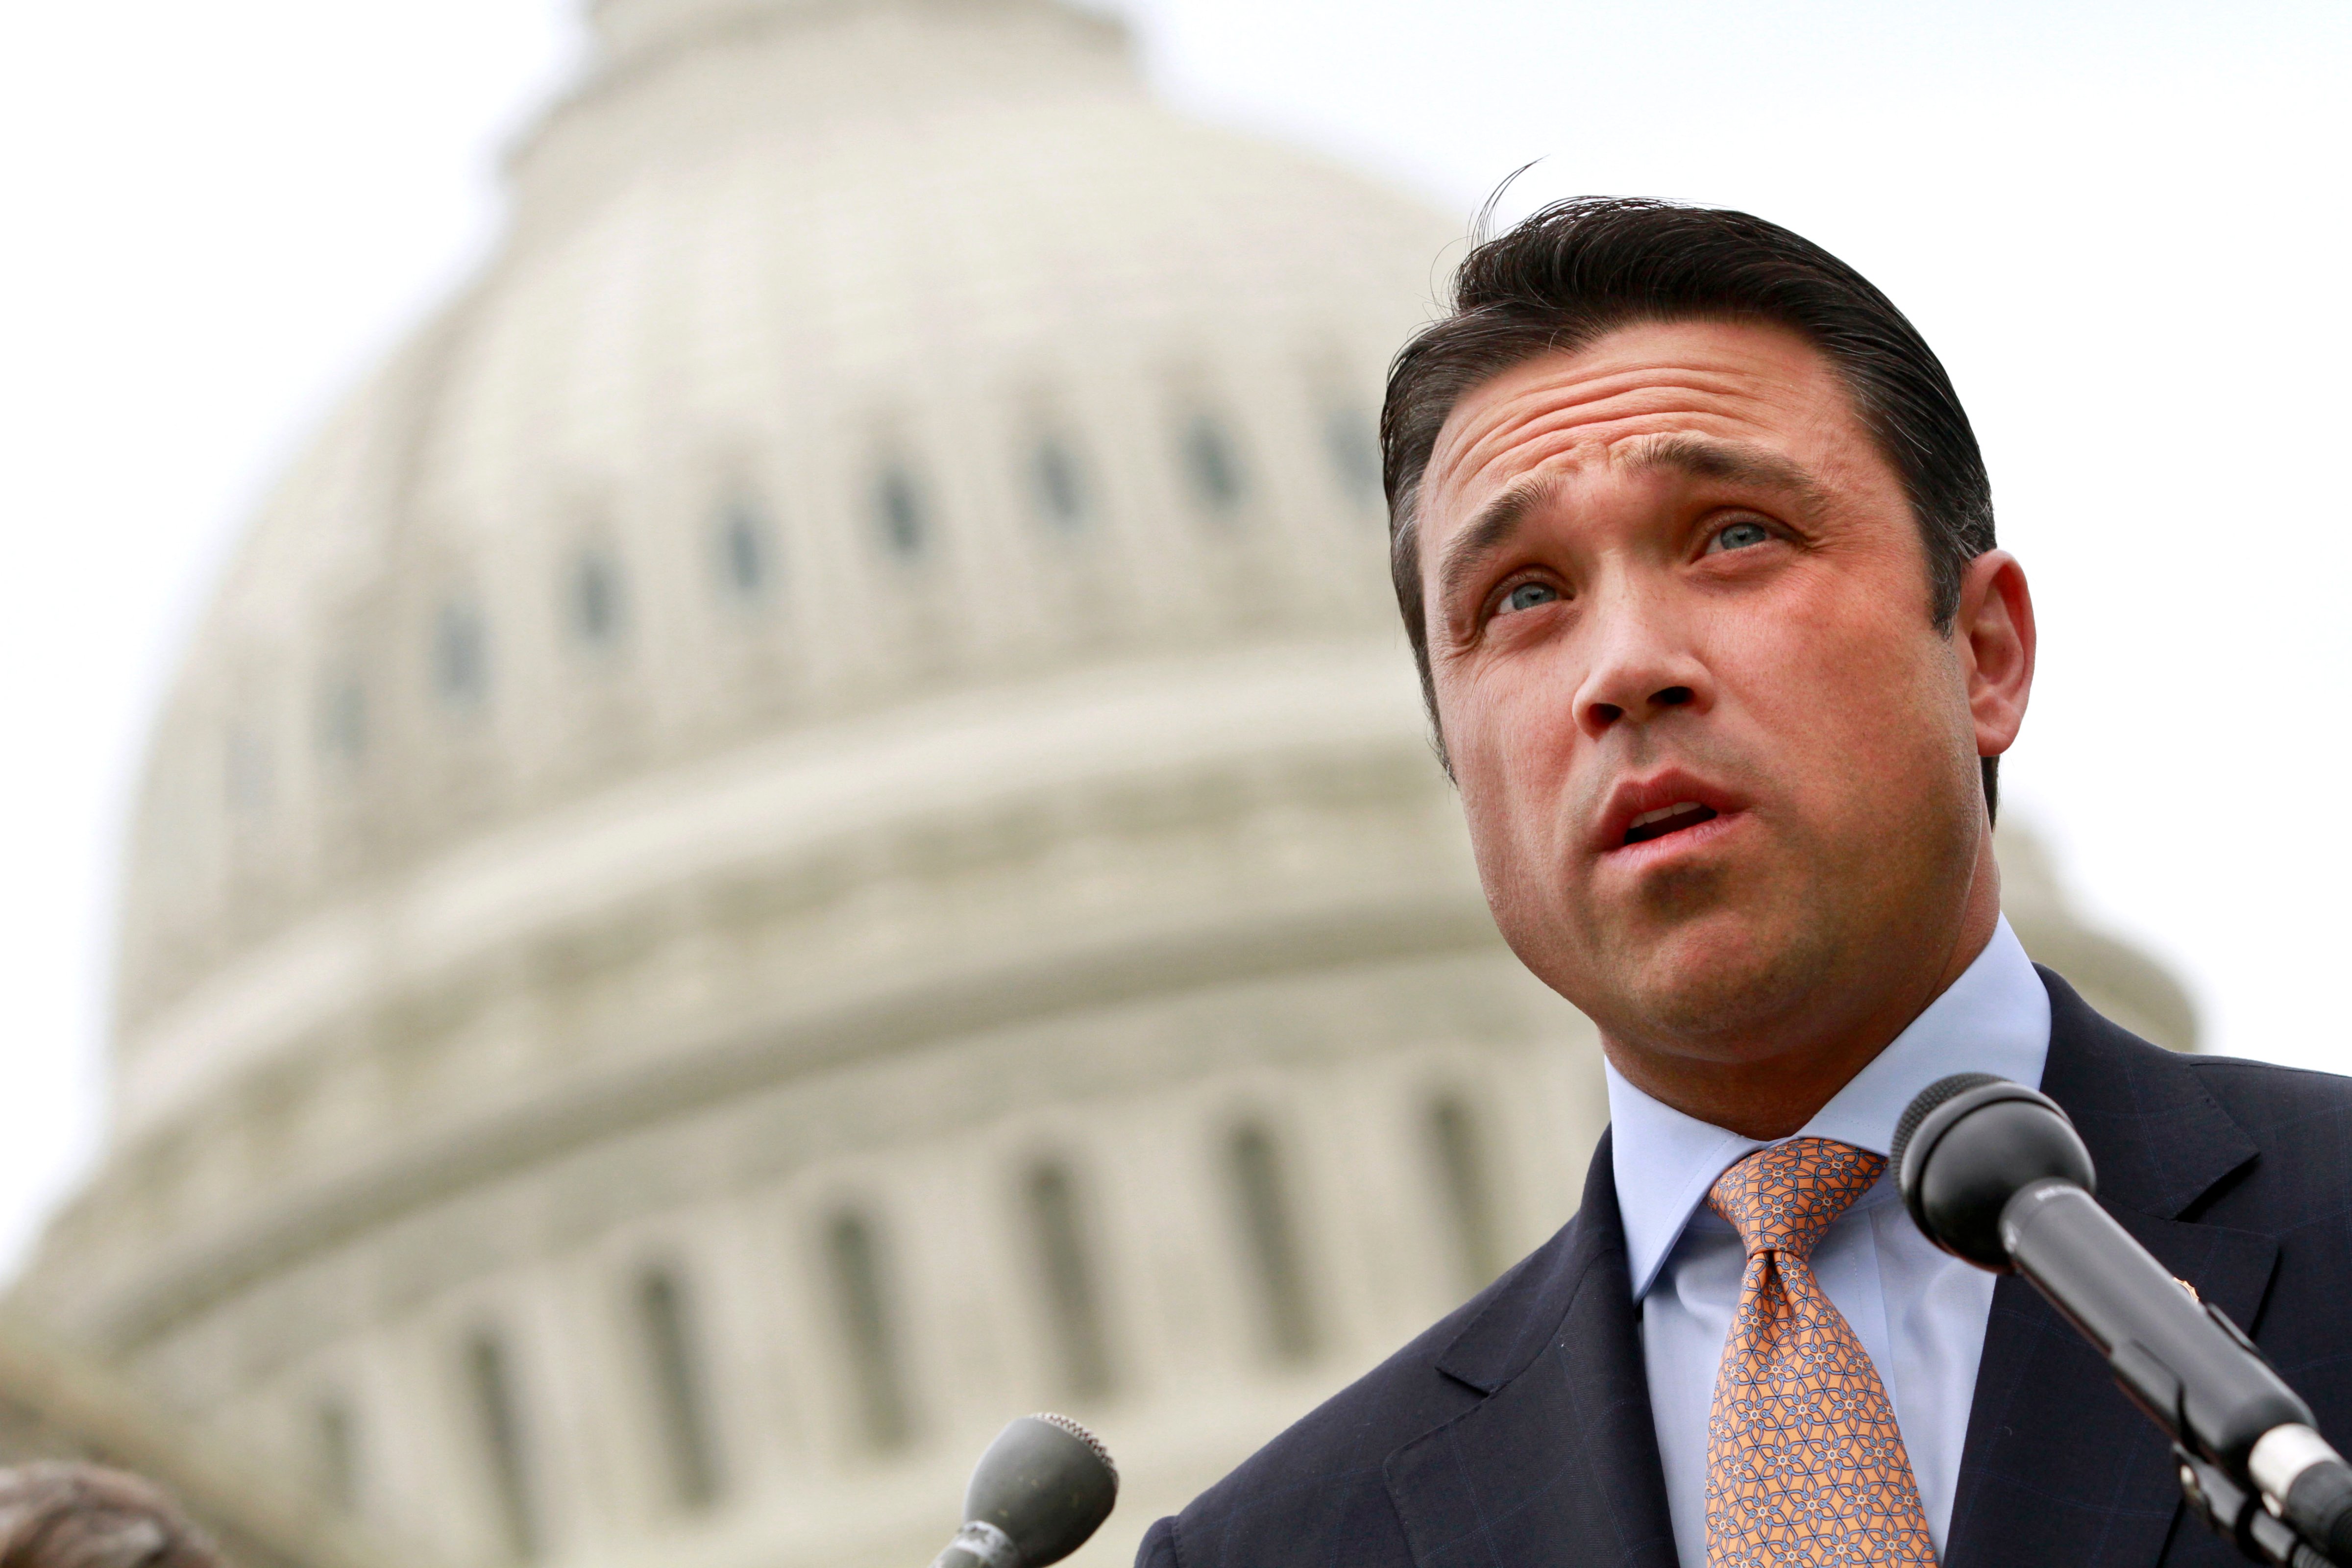 In this May 9, 2012 file photo, Rep. Michael Grimm, R-N.Y., speaks at a news conference on Capitol Hill in Washington. Grimm is facing criminal charges from federal prosecutors, his lawyer said on Friday, April 25, 2014. (Jacquelyn Martin—AP)